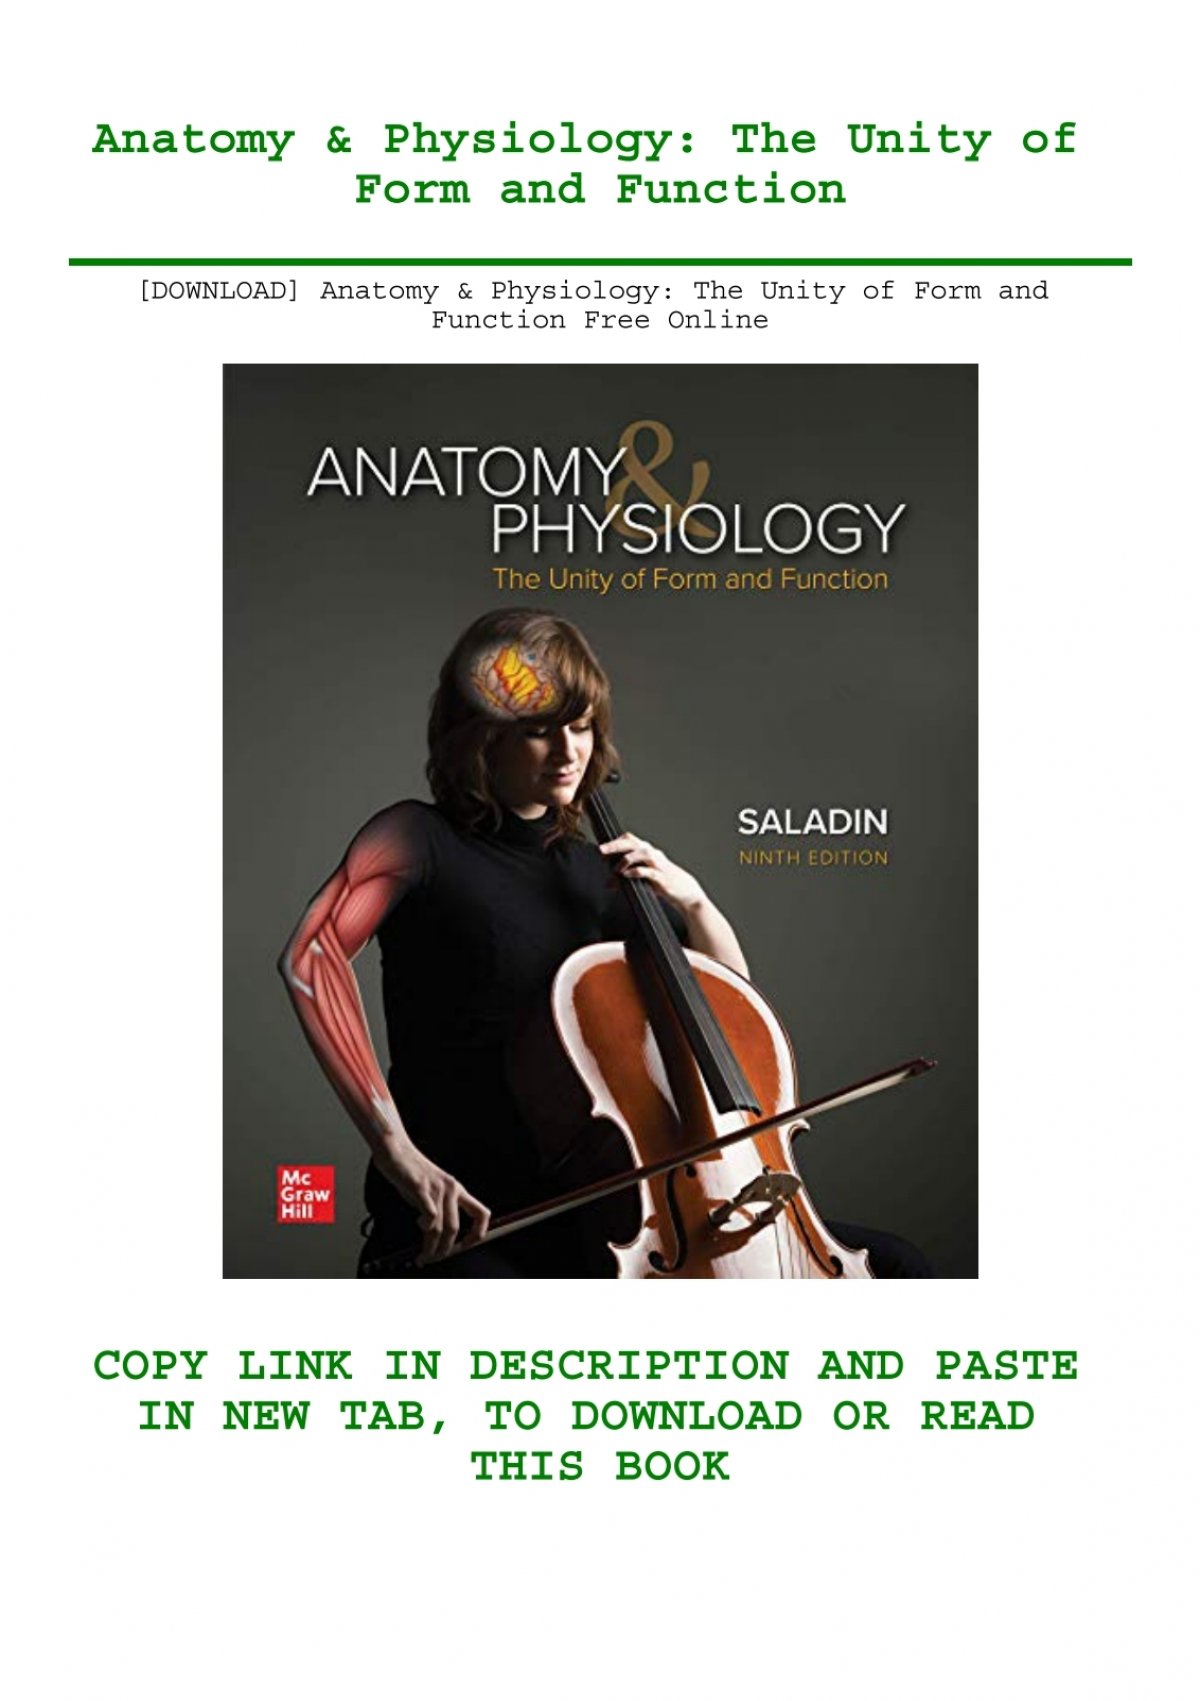 download-anatomy-amp-physiology-the-unity-of-form-and-function-free